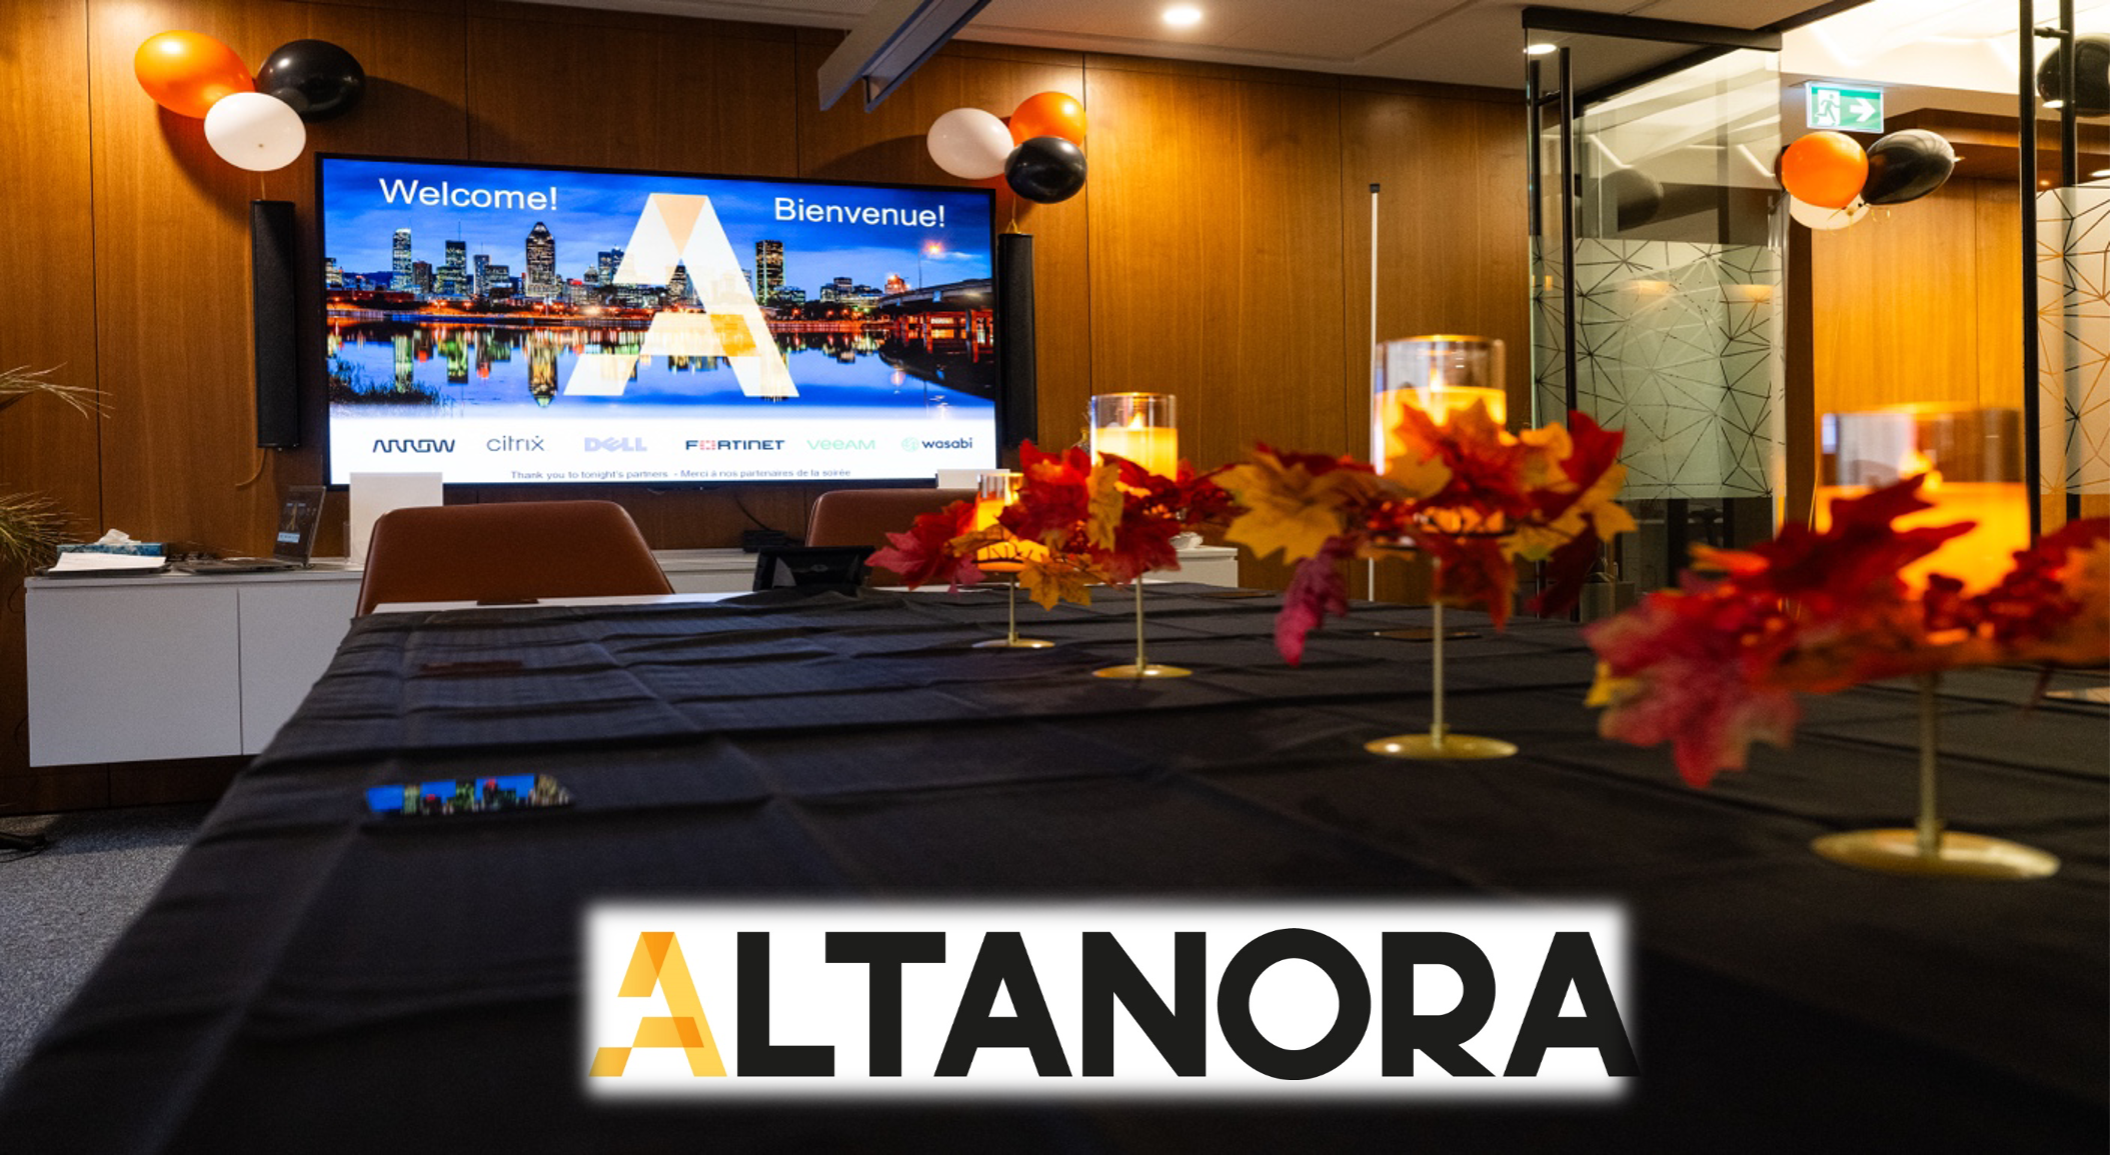 Altanora's rebranding and welcome event